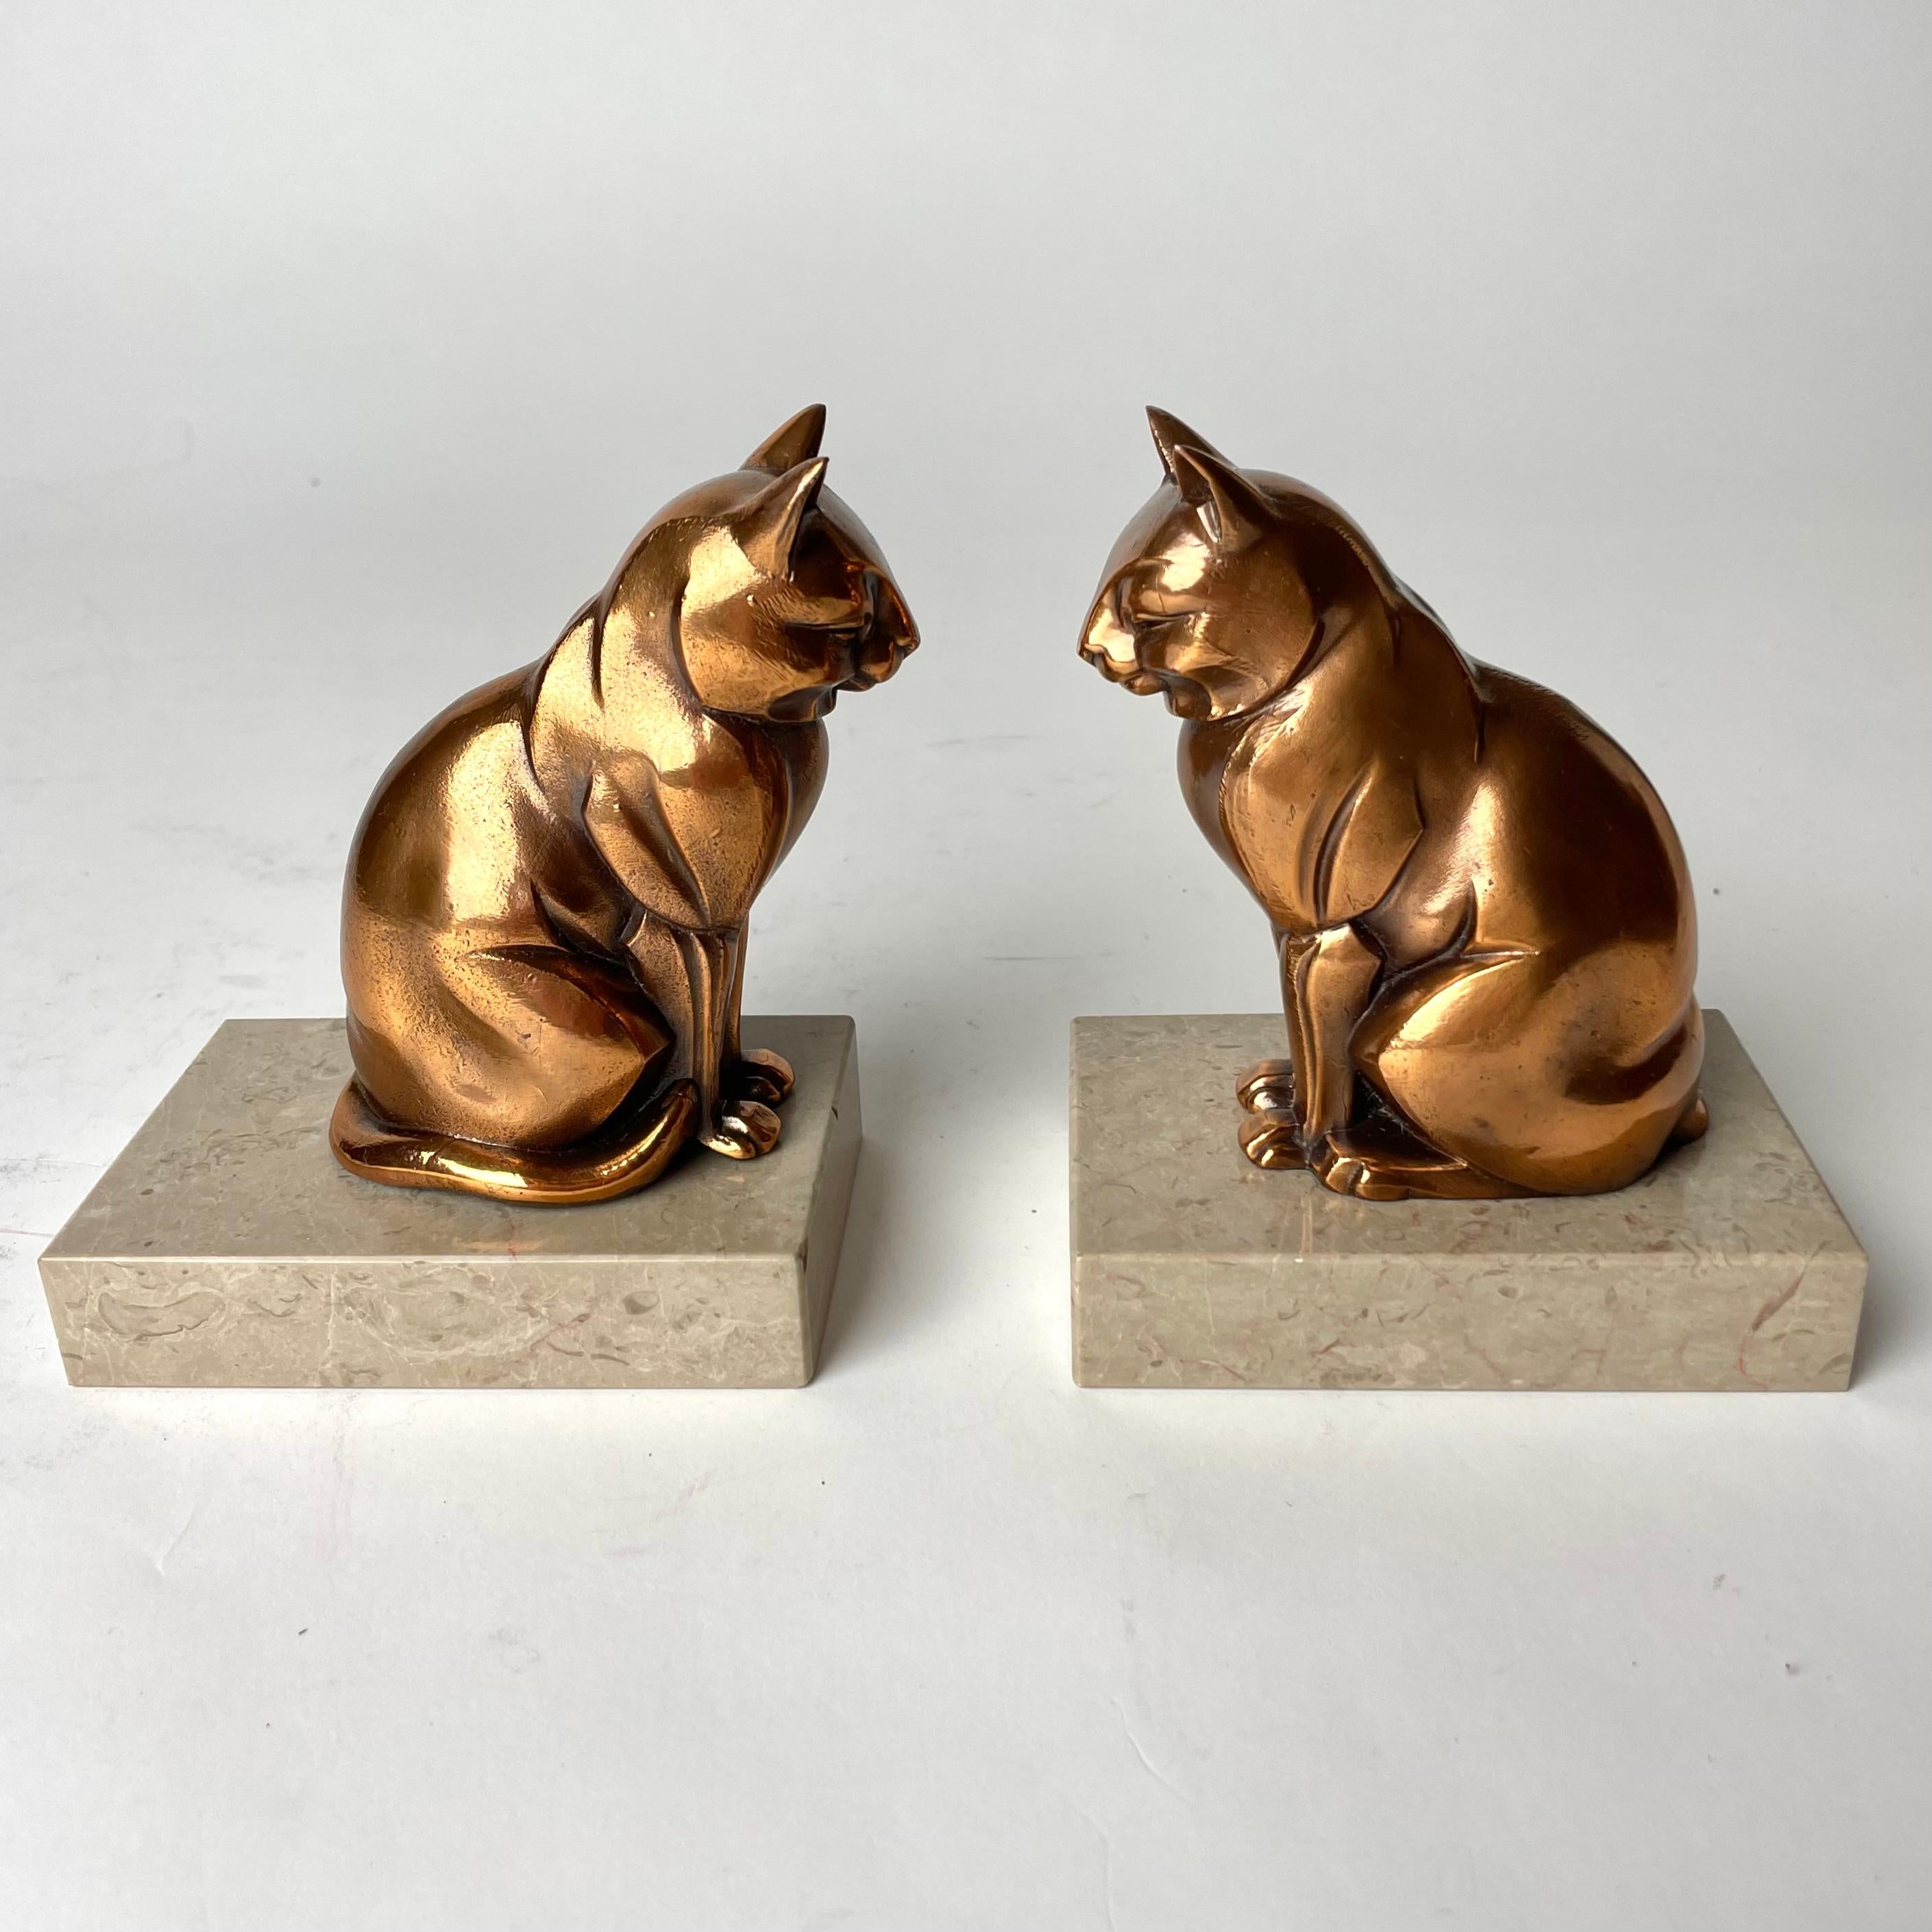 A pair of Cool Art Deco bookends from the 1920s-30s. Very period Art Deco cats in metal and marble.


Wear consistent with age and use 